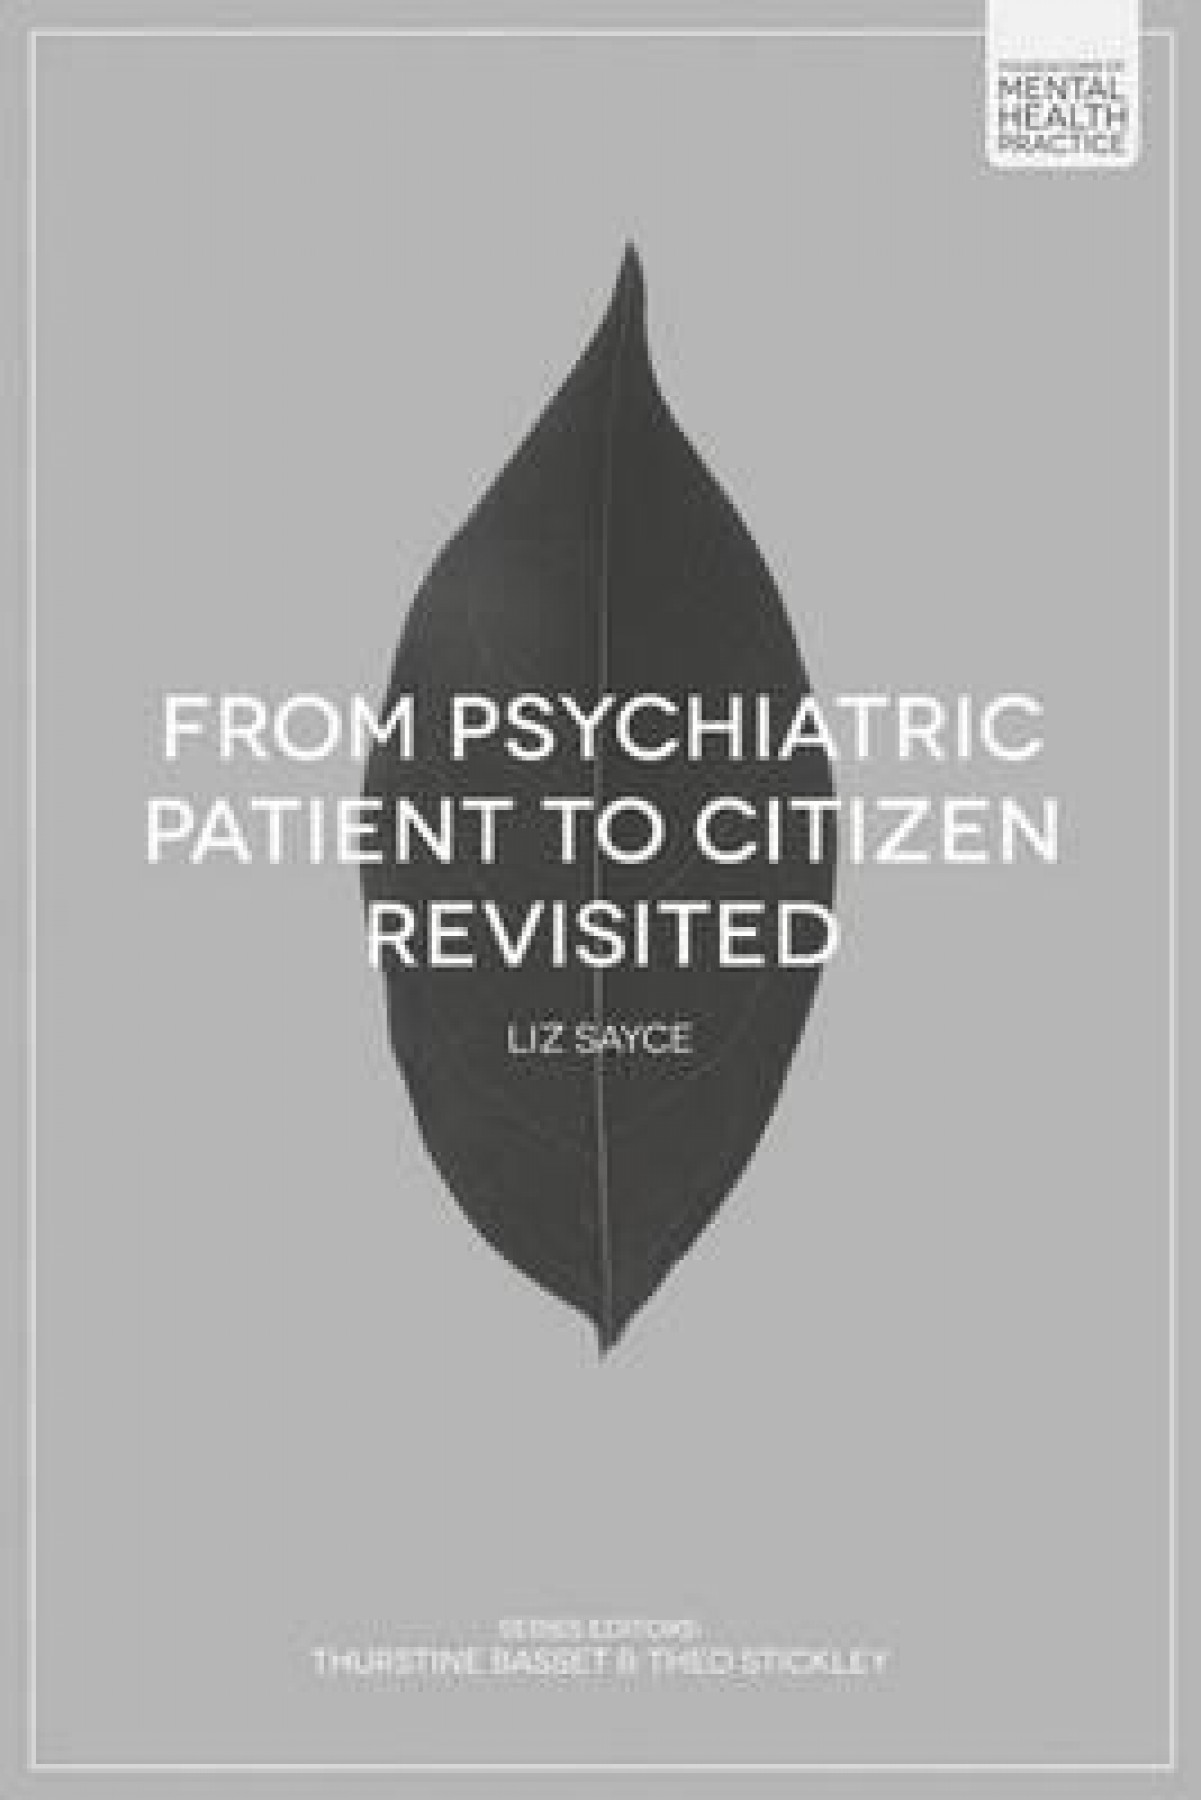 From psychiatric patient to citizen revisited